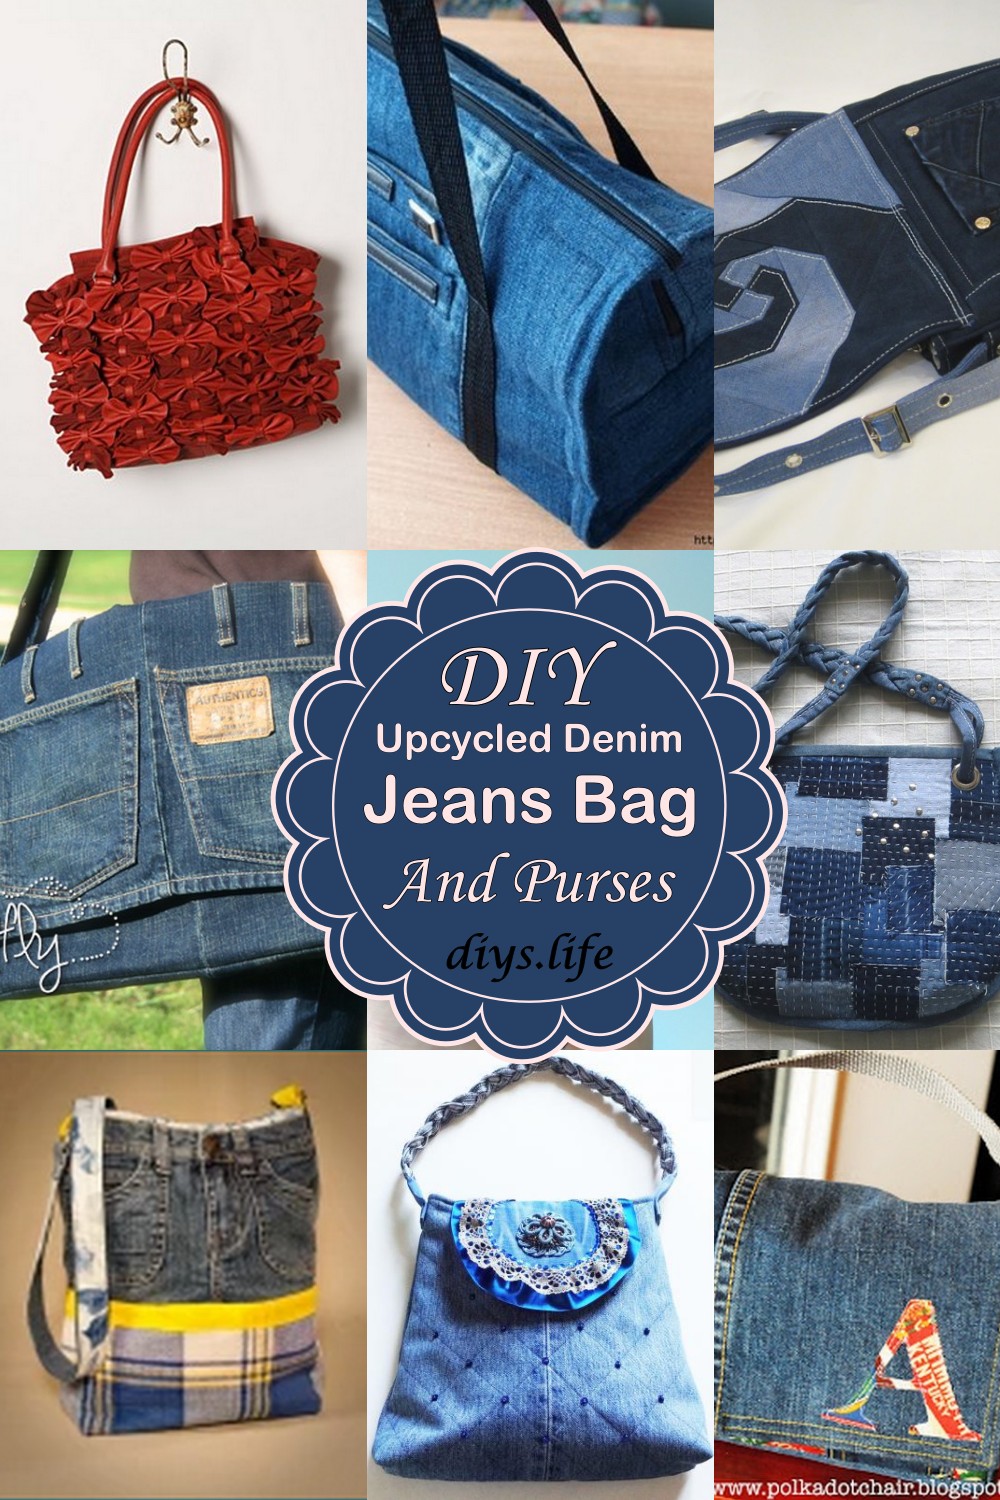 How to Make Adorable Bags from Repurposed Jeans - DIY & Crafts